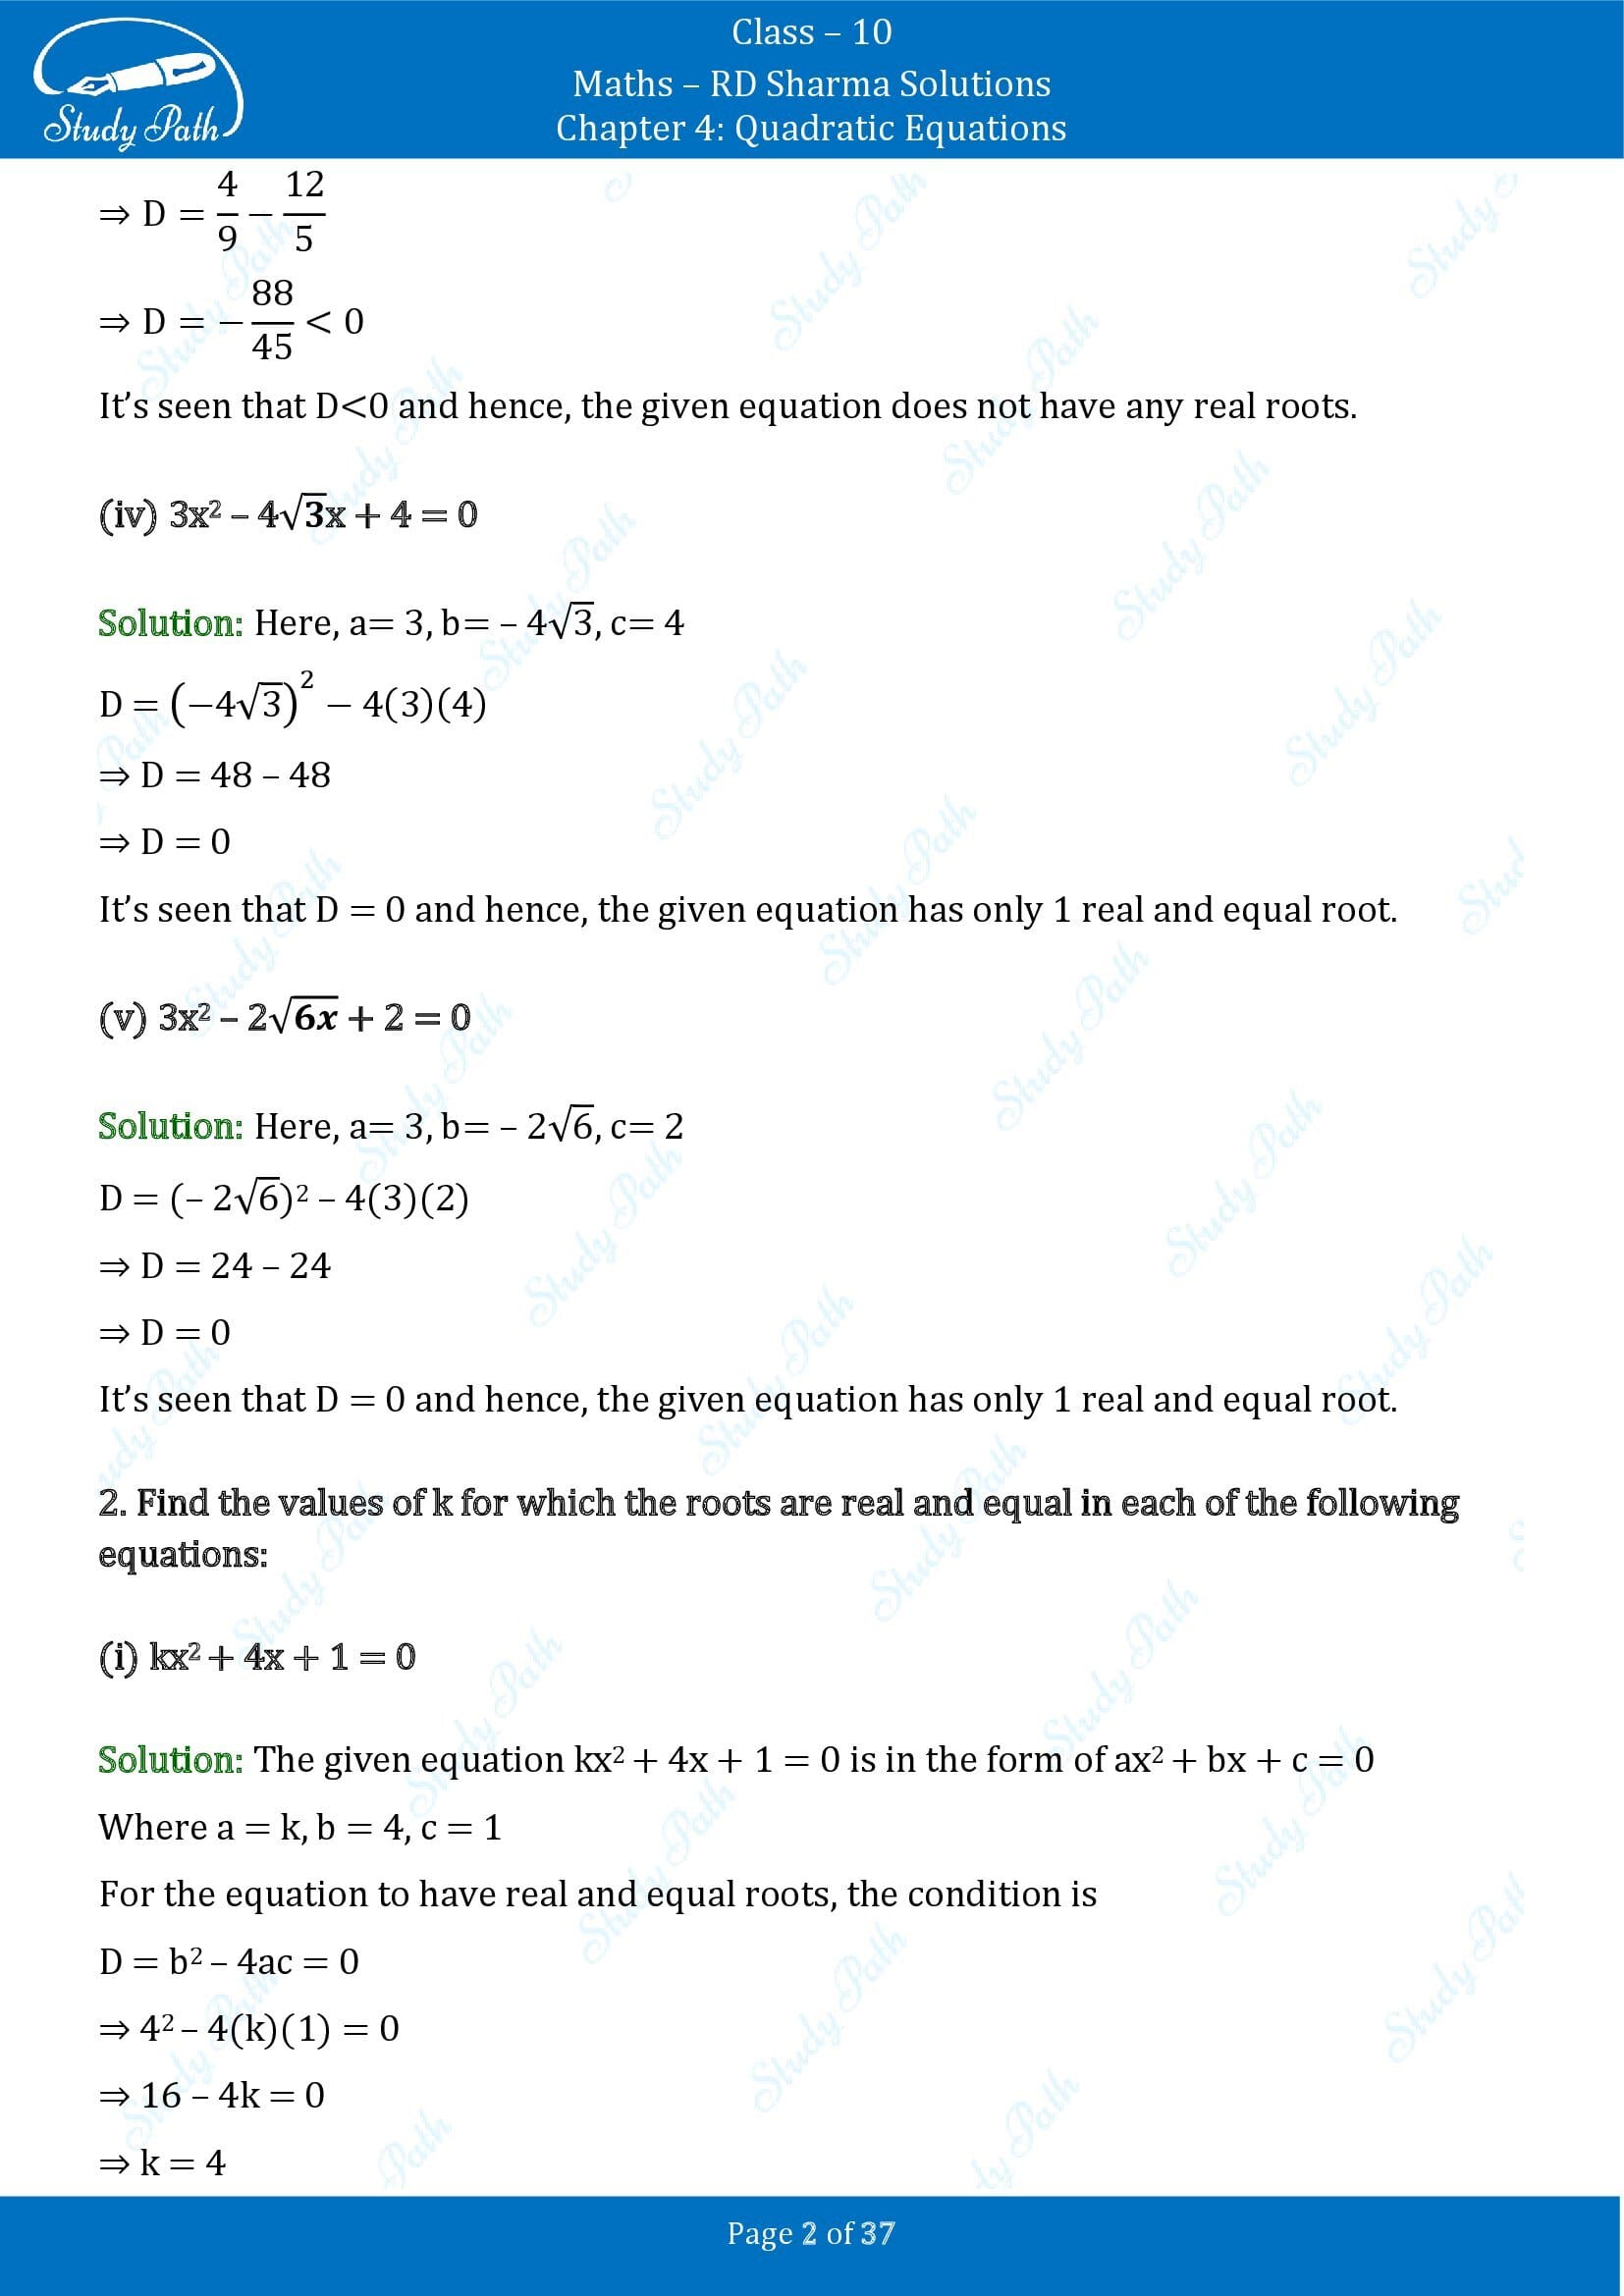 RD Sharma Solutions Class 10 Chapter 4 Quadratic Equations Exercise 4.6 00002